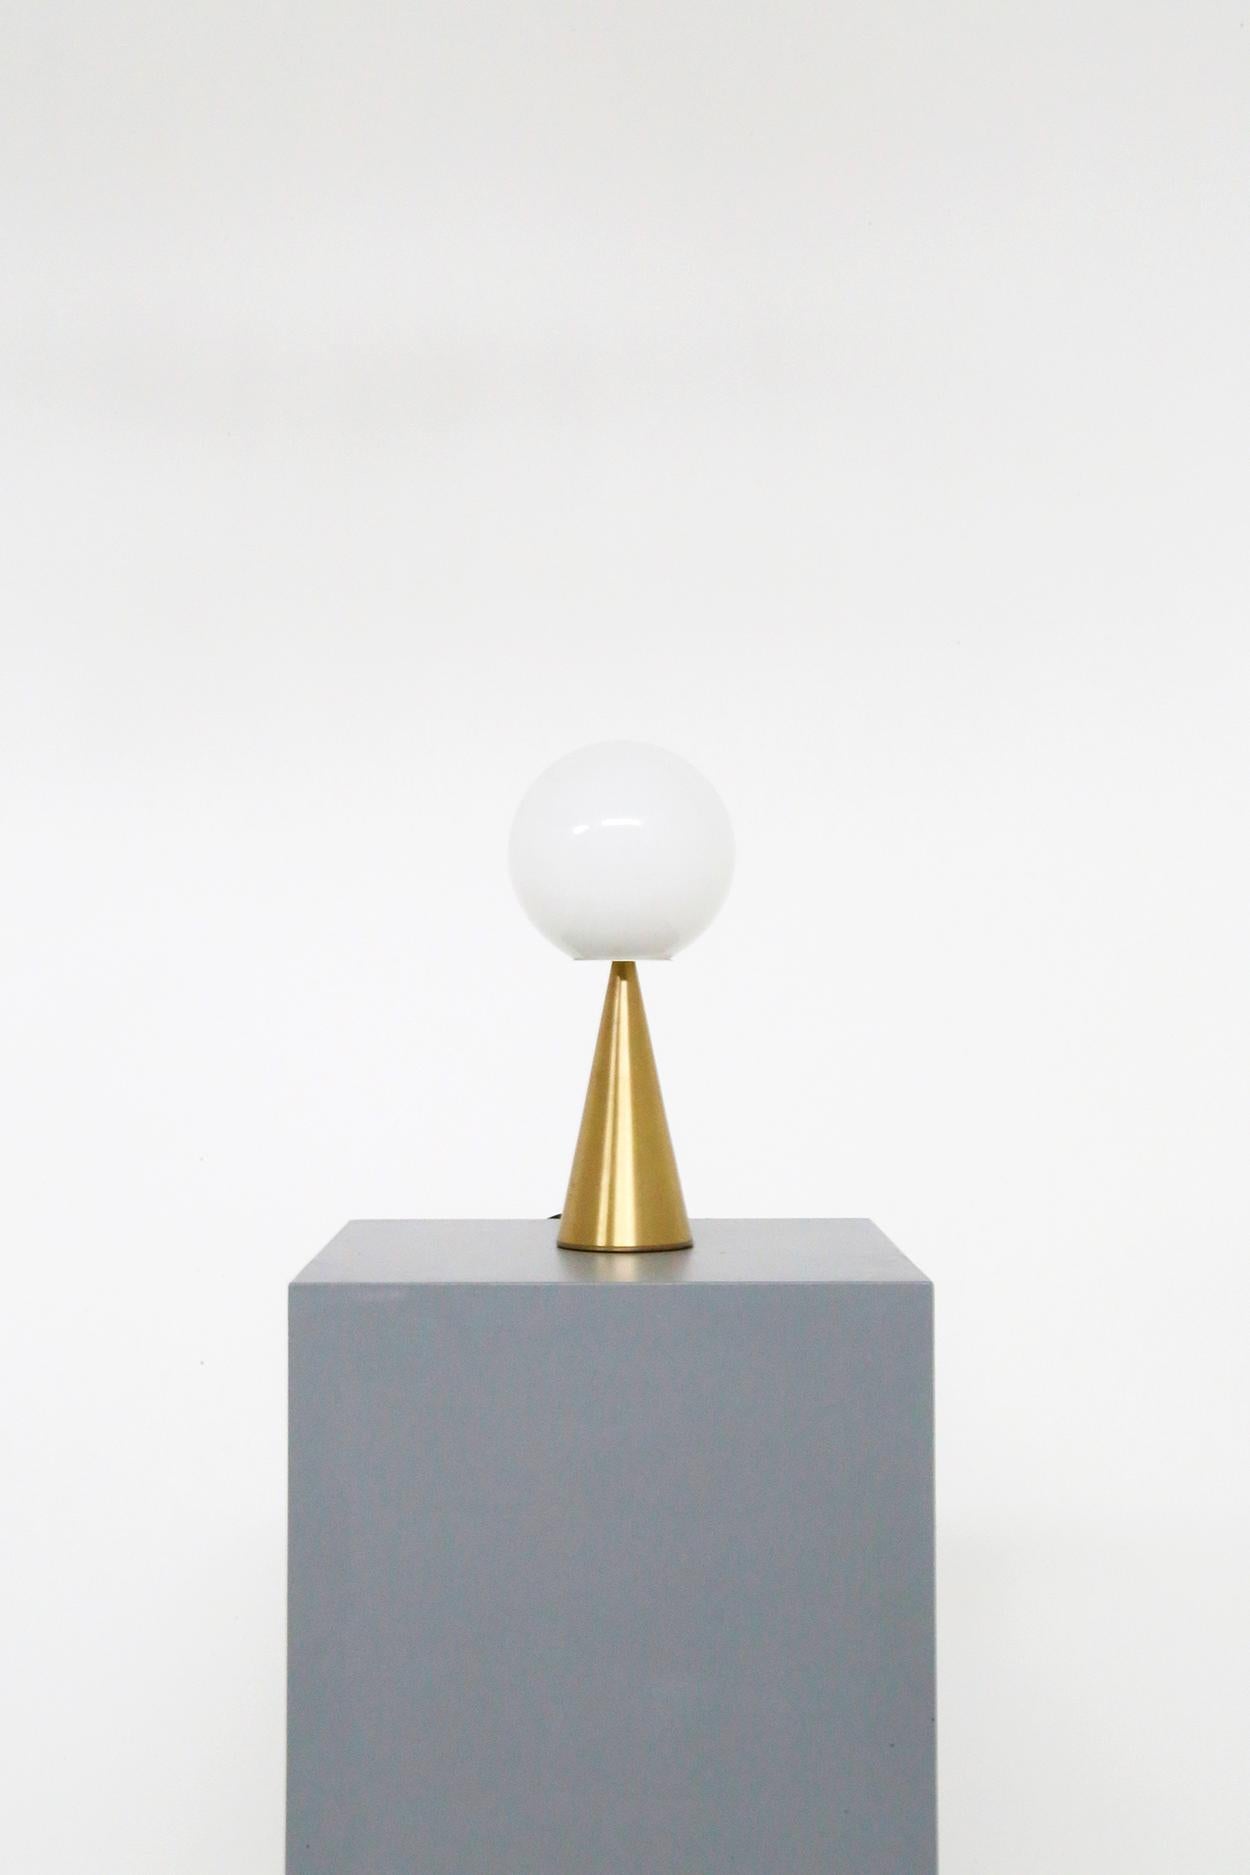 Mid-Century Modern Gio Ponti Table Lamp Model Bilia for Fontana Arte in Brass and Glass, 1960